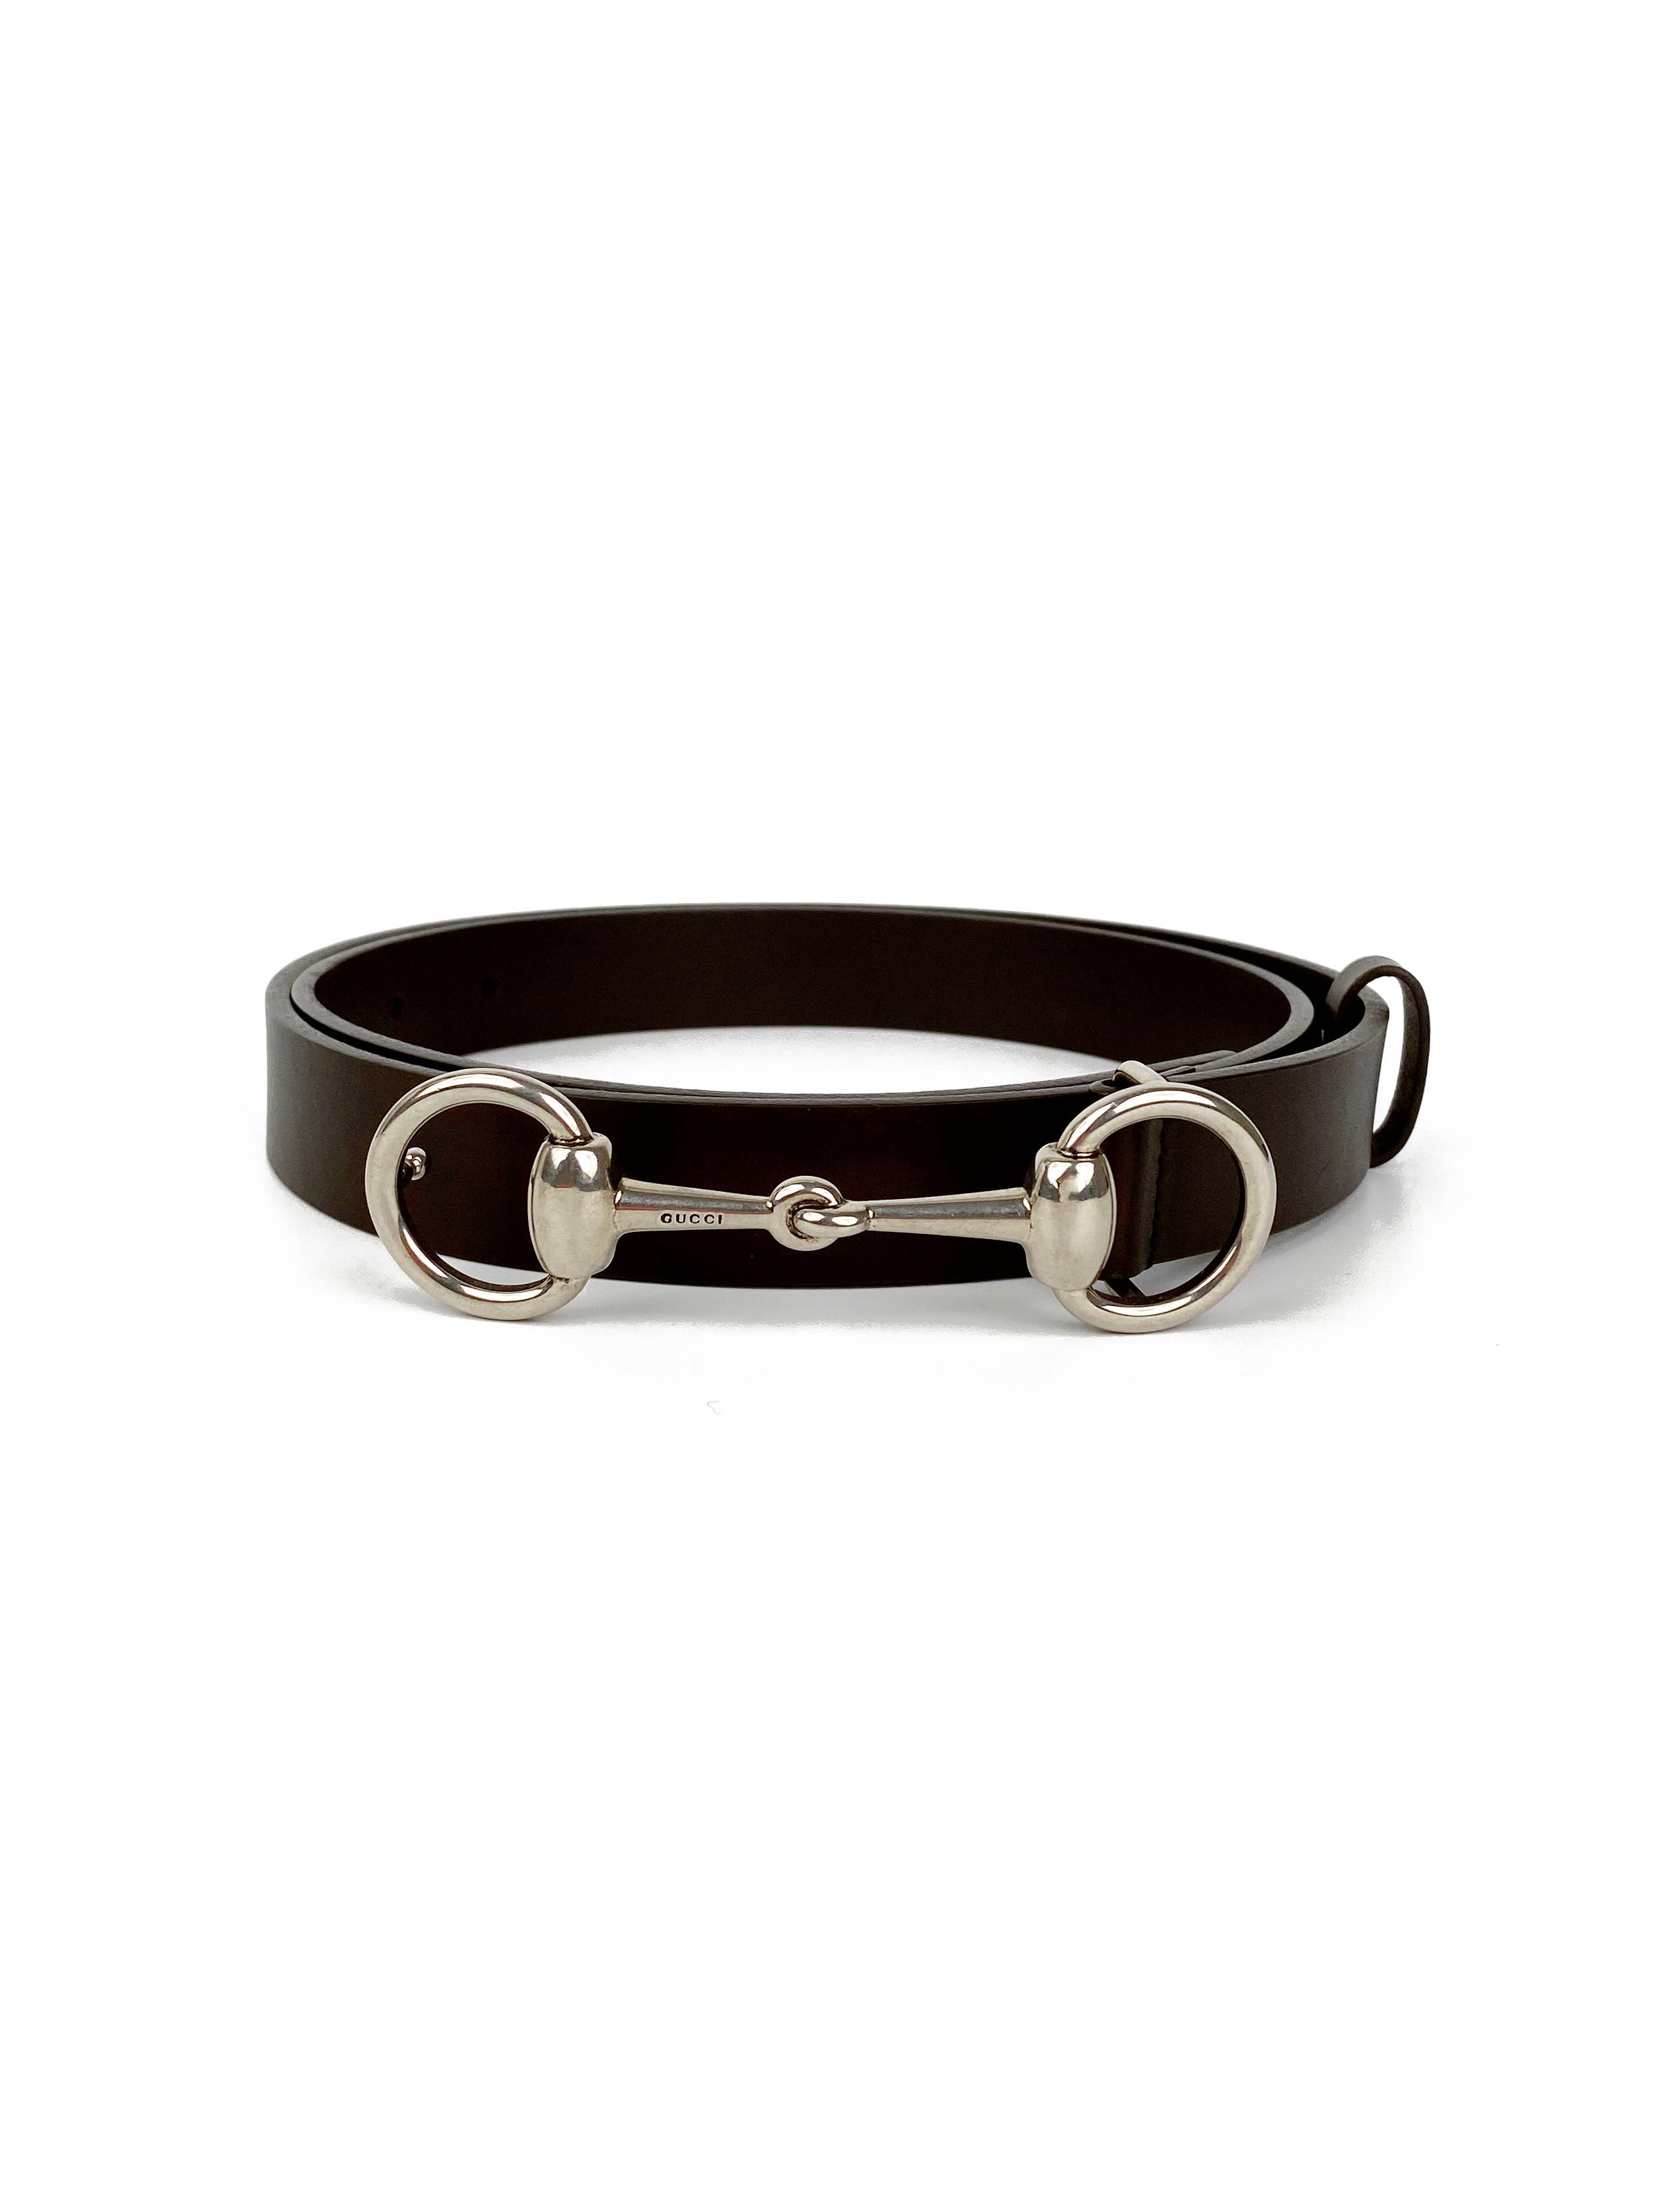 Gucci Brown Horsebit Belt with Silver Buckle 95